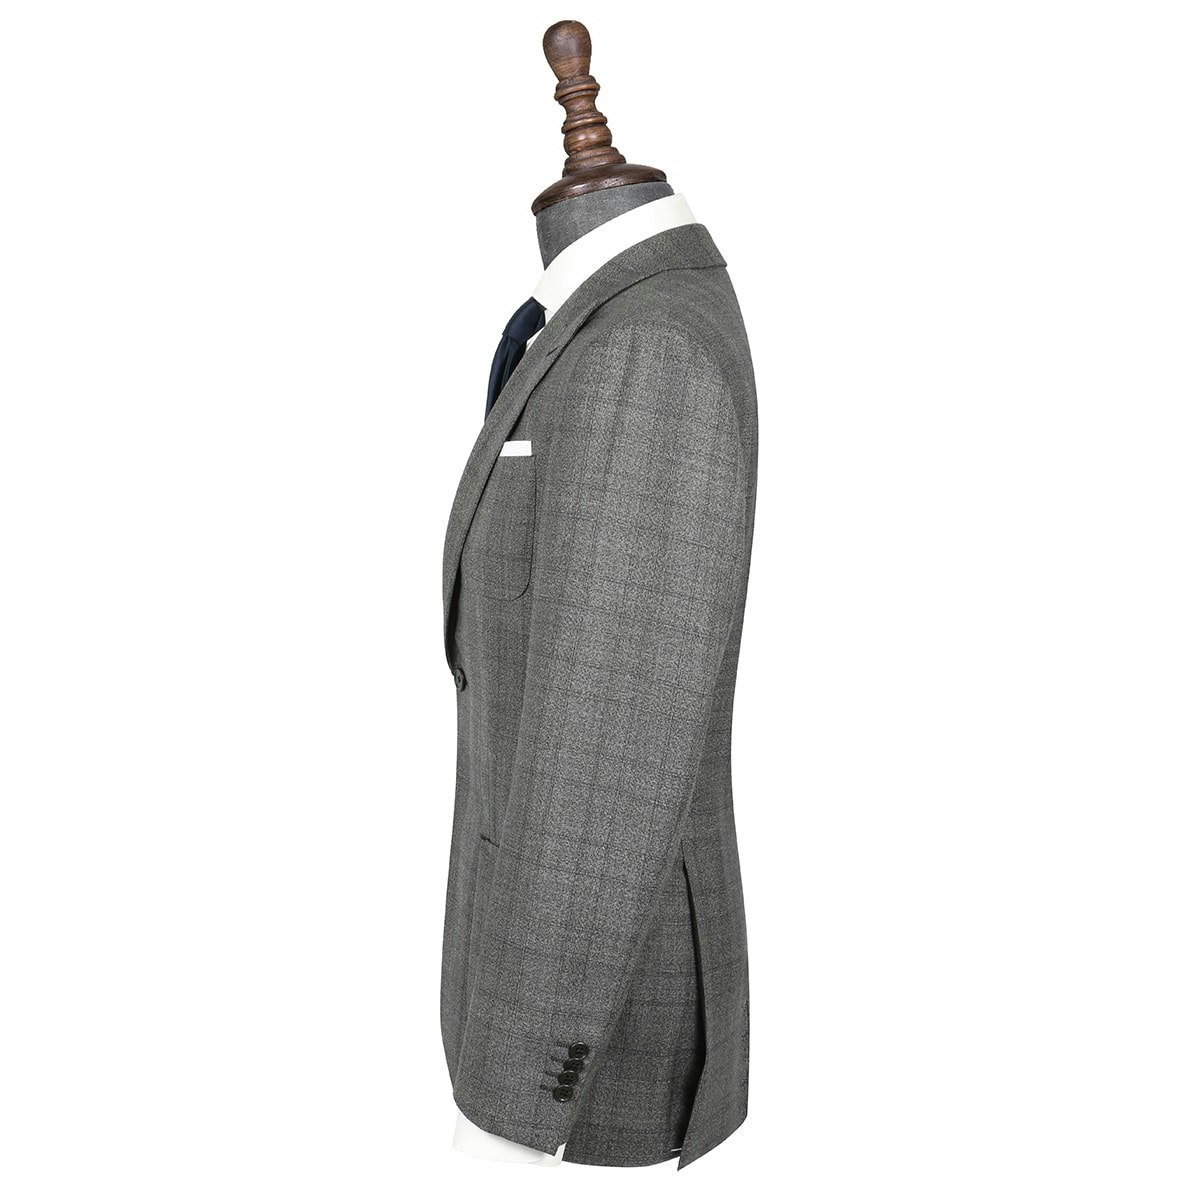 InStitchu Collection Freehill Charcoal Glen Plaid Wool Jacket